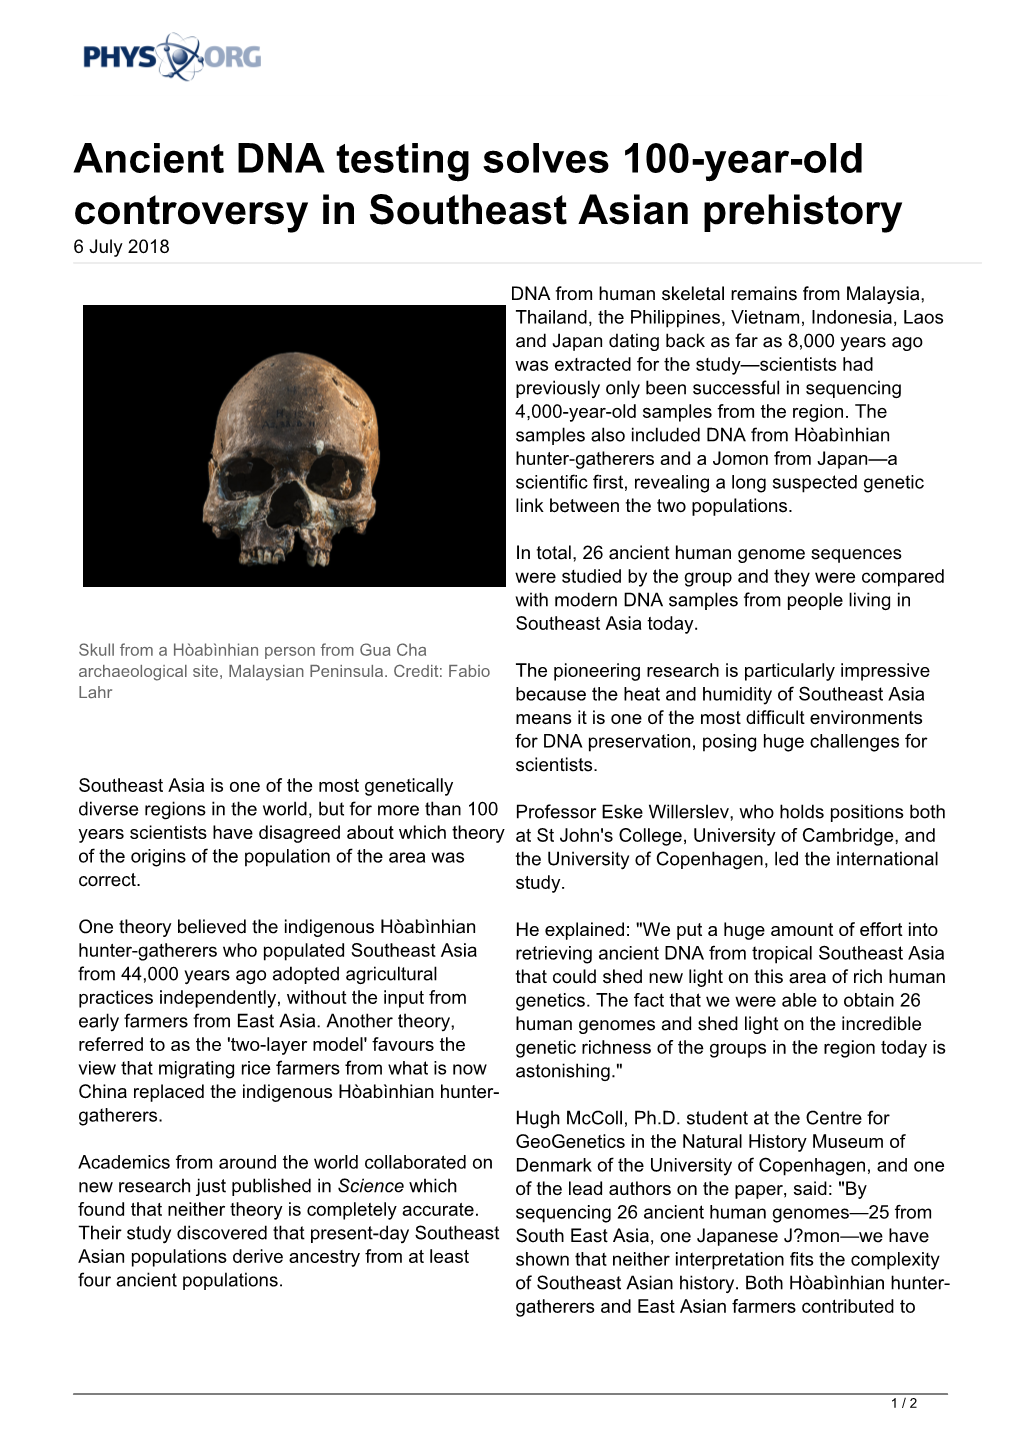 Ancient DNA Testing Solves 100-Year-Old Controversy in Southeast Asian Prehistory 6 July 2018